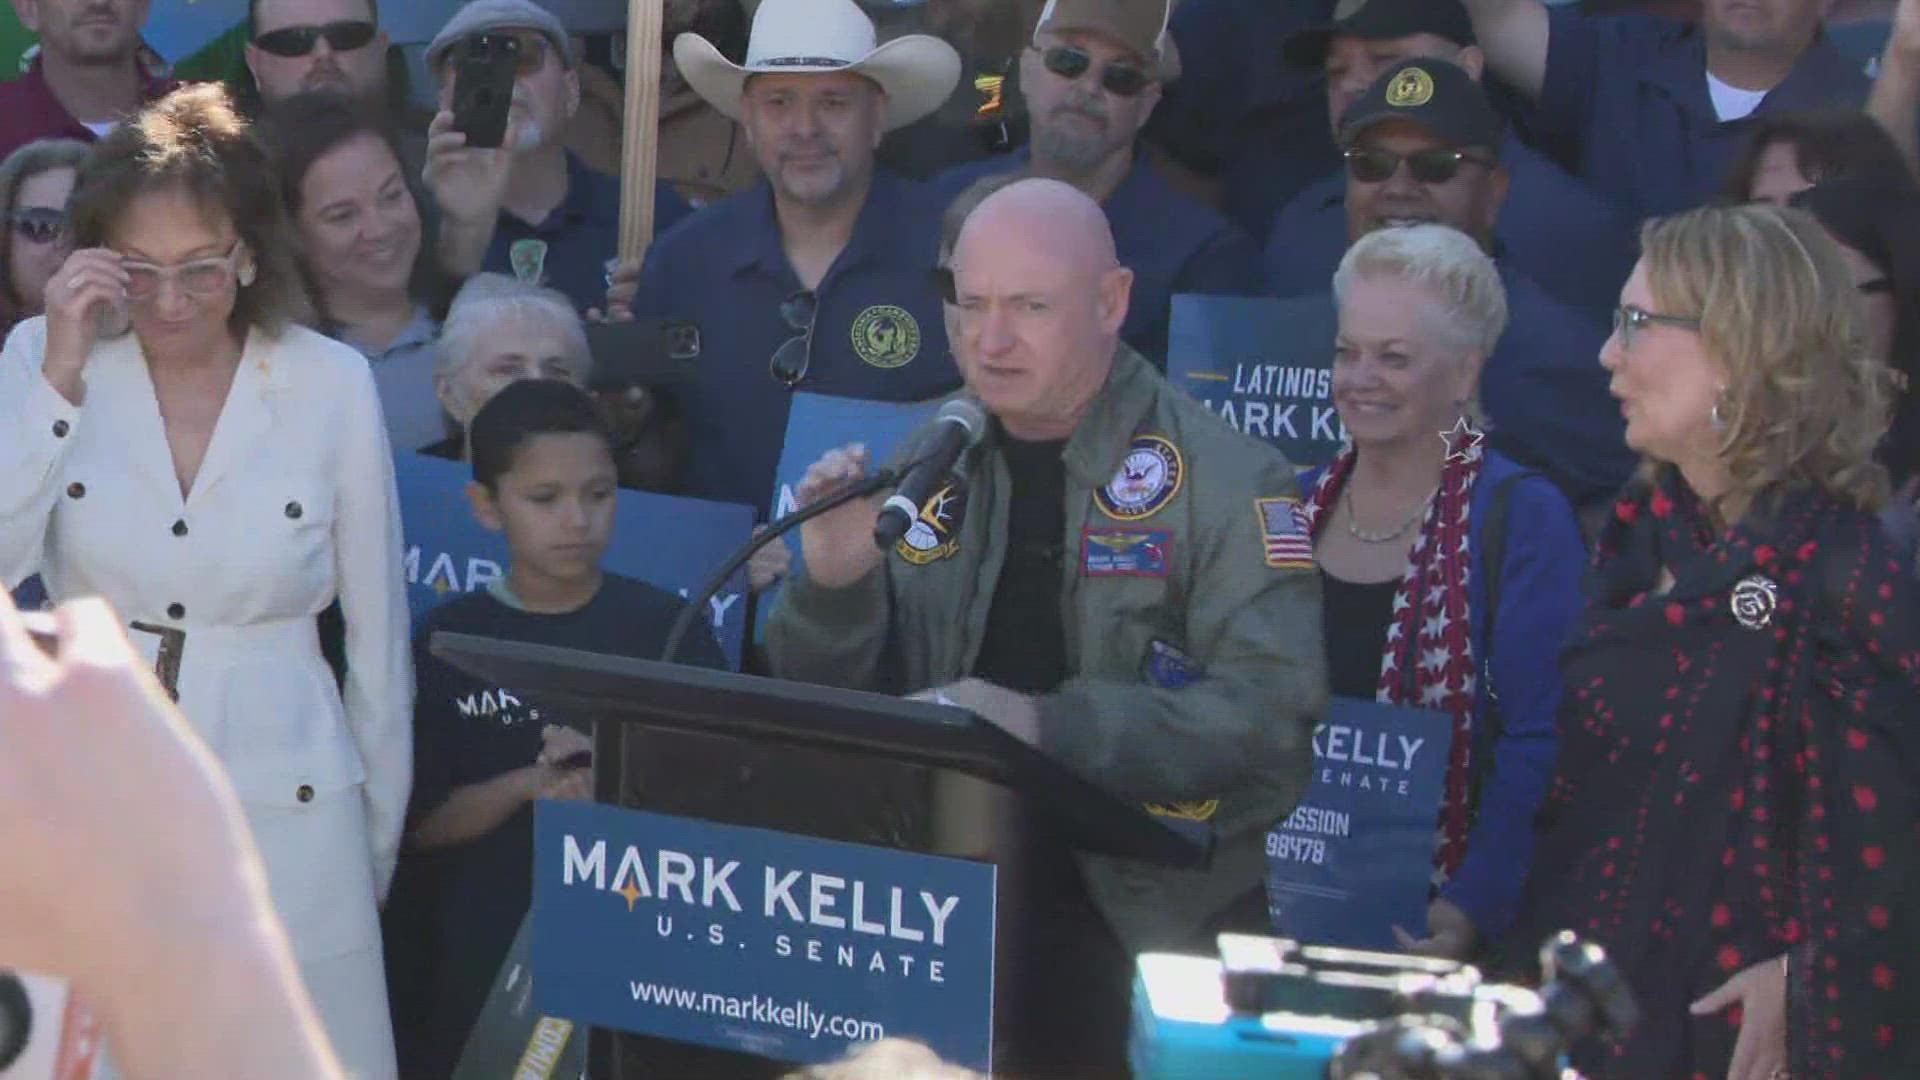 Sen. Mark Kelly urged Arizonans to let go of 'conspiracies of the past' on Saturday, calling for unity a day after he won re-election to a crucial Senate seat.